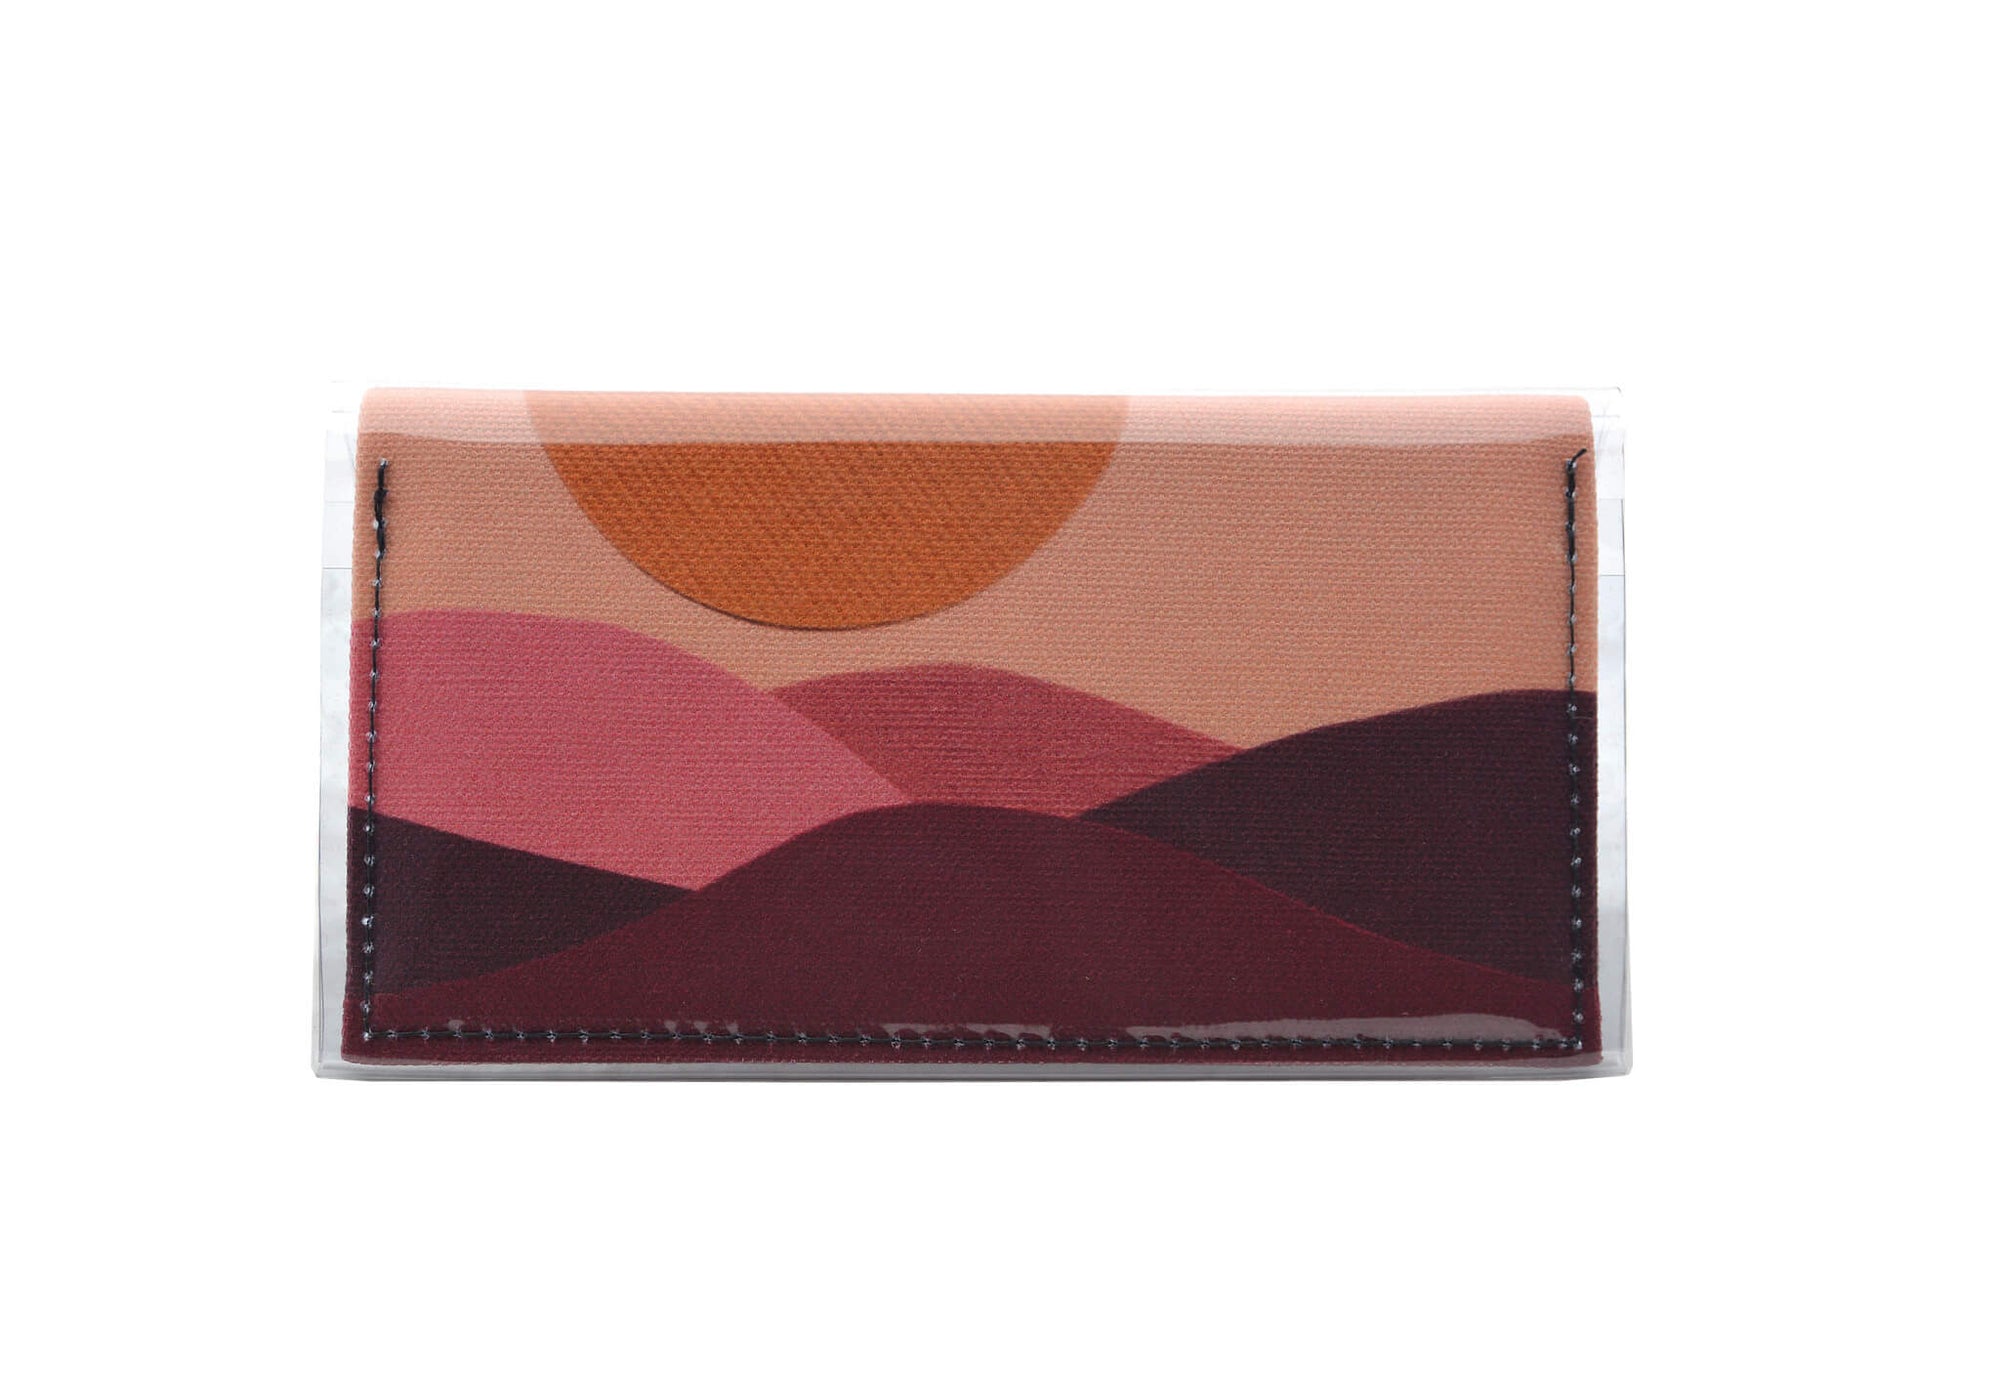 This is an image of the rear of a Kitty Came Home bifold mini purse clutch in the 'Moonage daydream' design by Satin and Tat. A golden sun above a burgundy landscape. This is the small size.